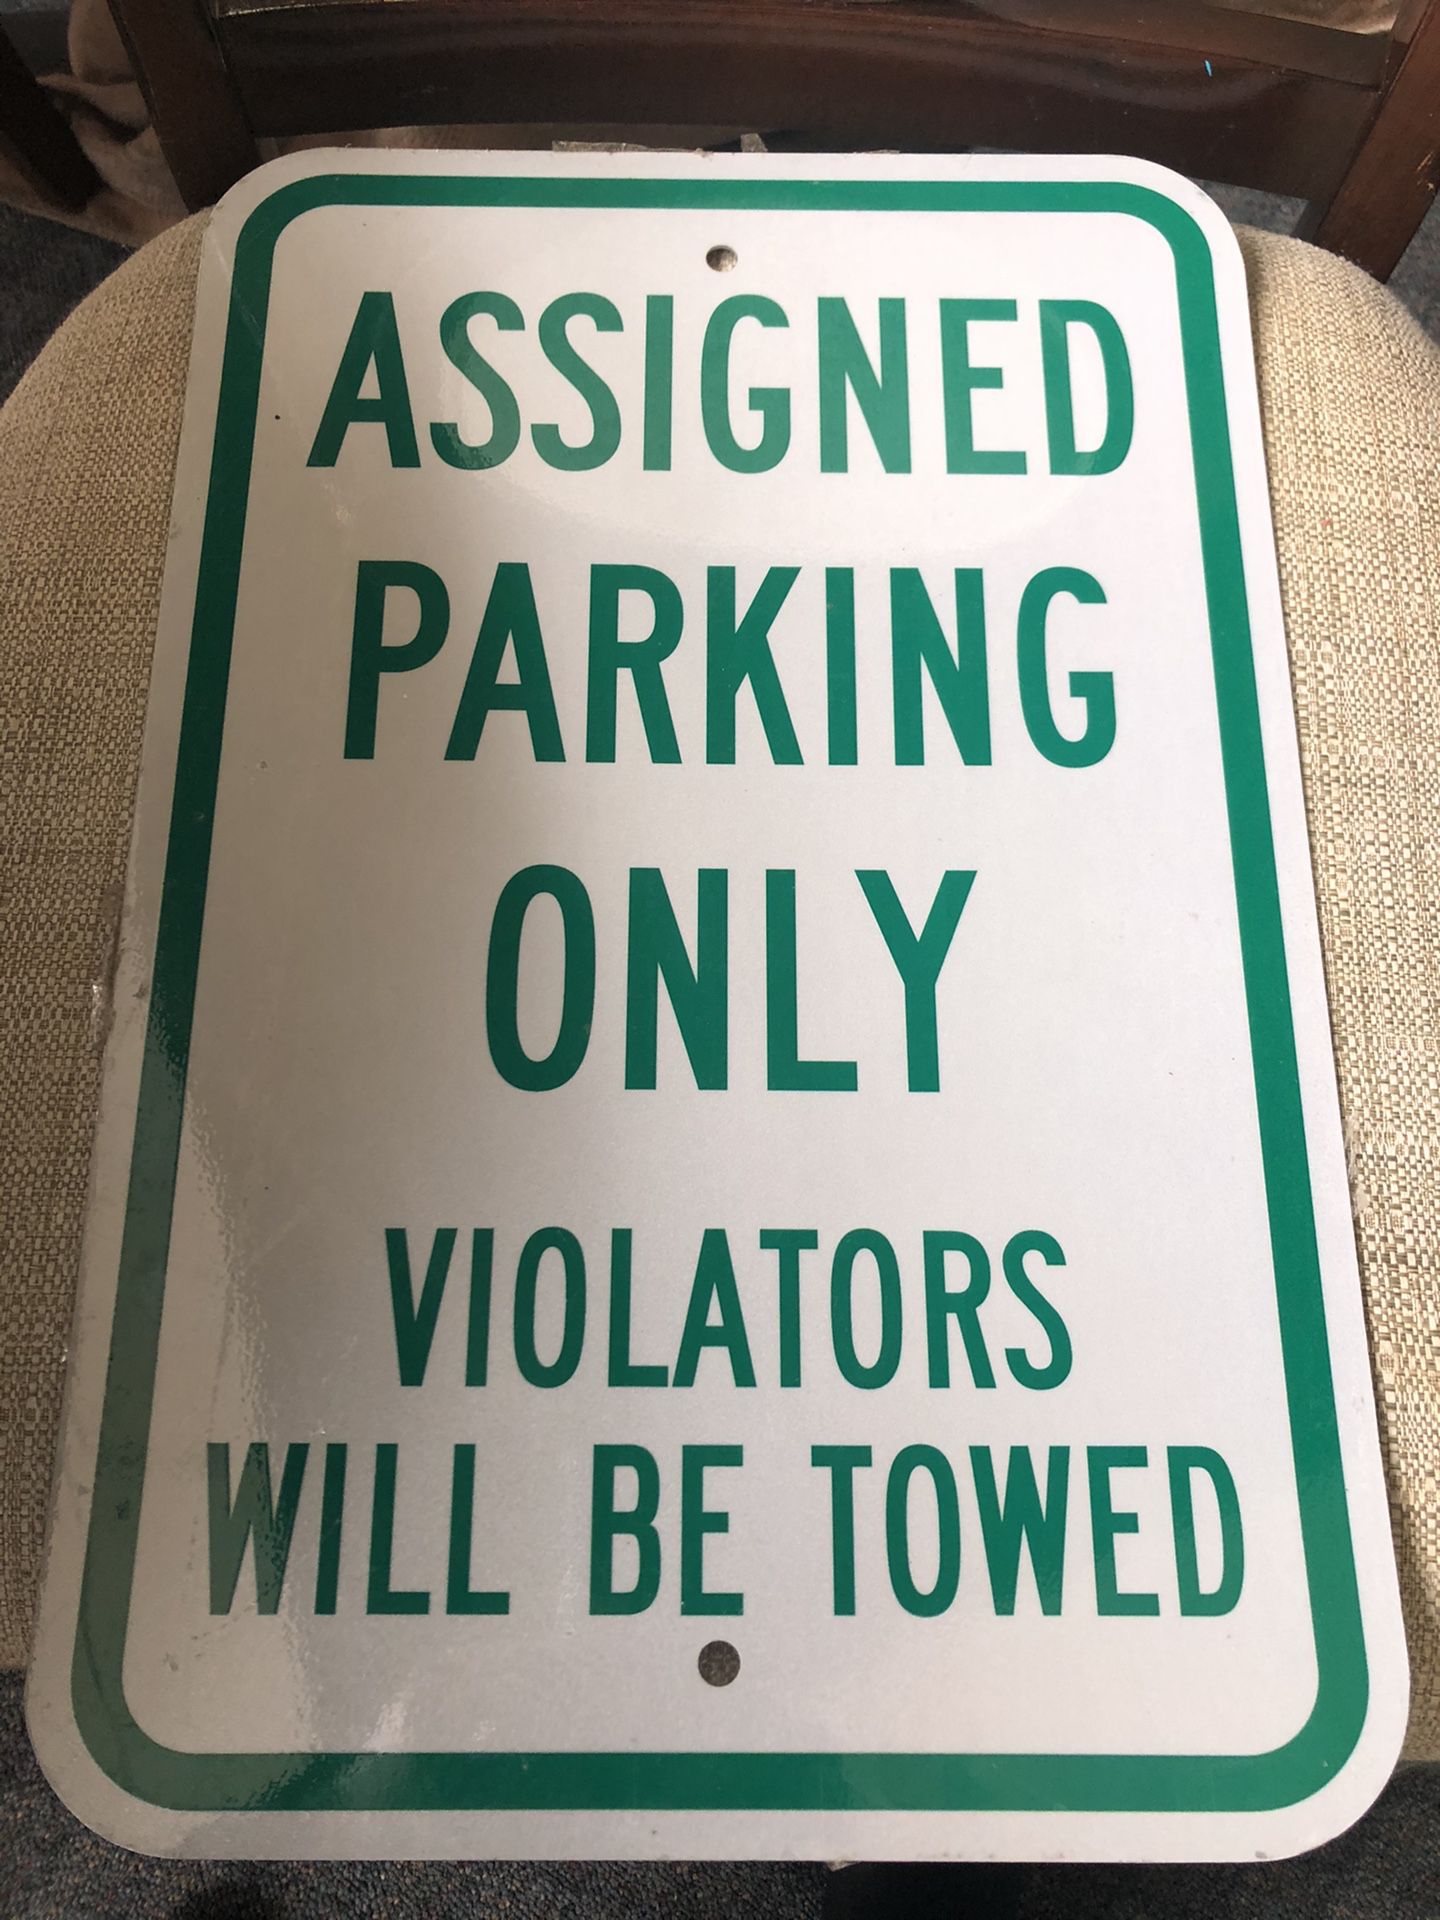 Brand new Assigned Parking Only violators will be towed